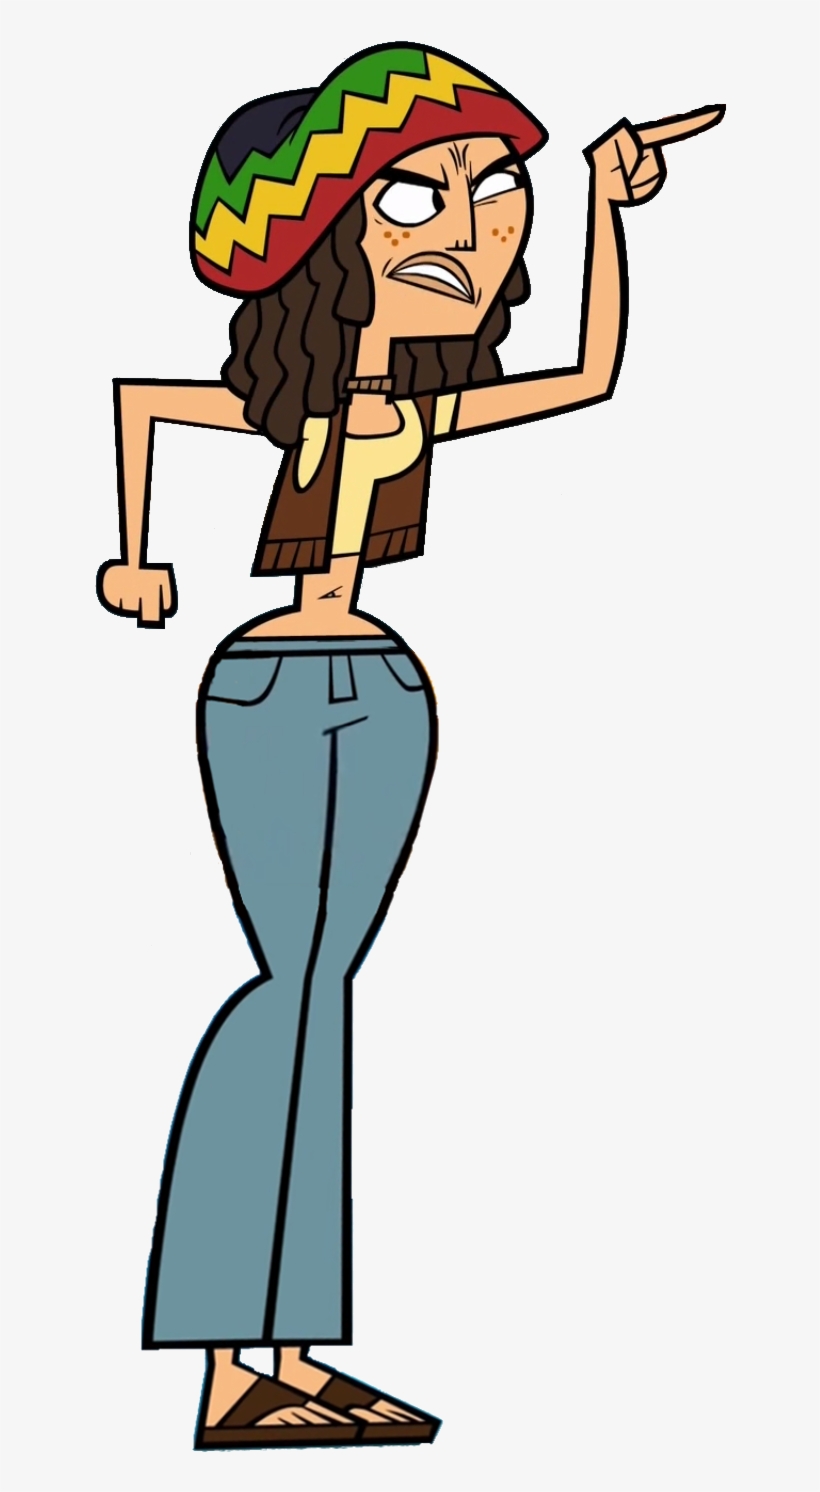 Drama Png - Total Drama Laurie Png, transparent png #9536971